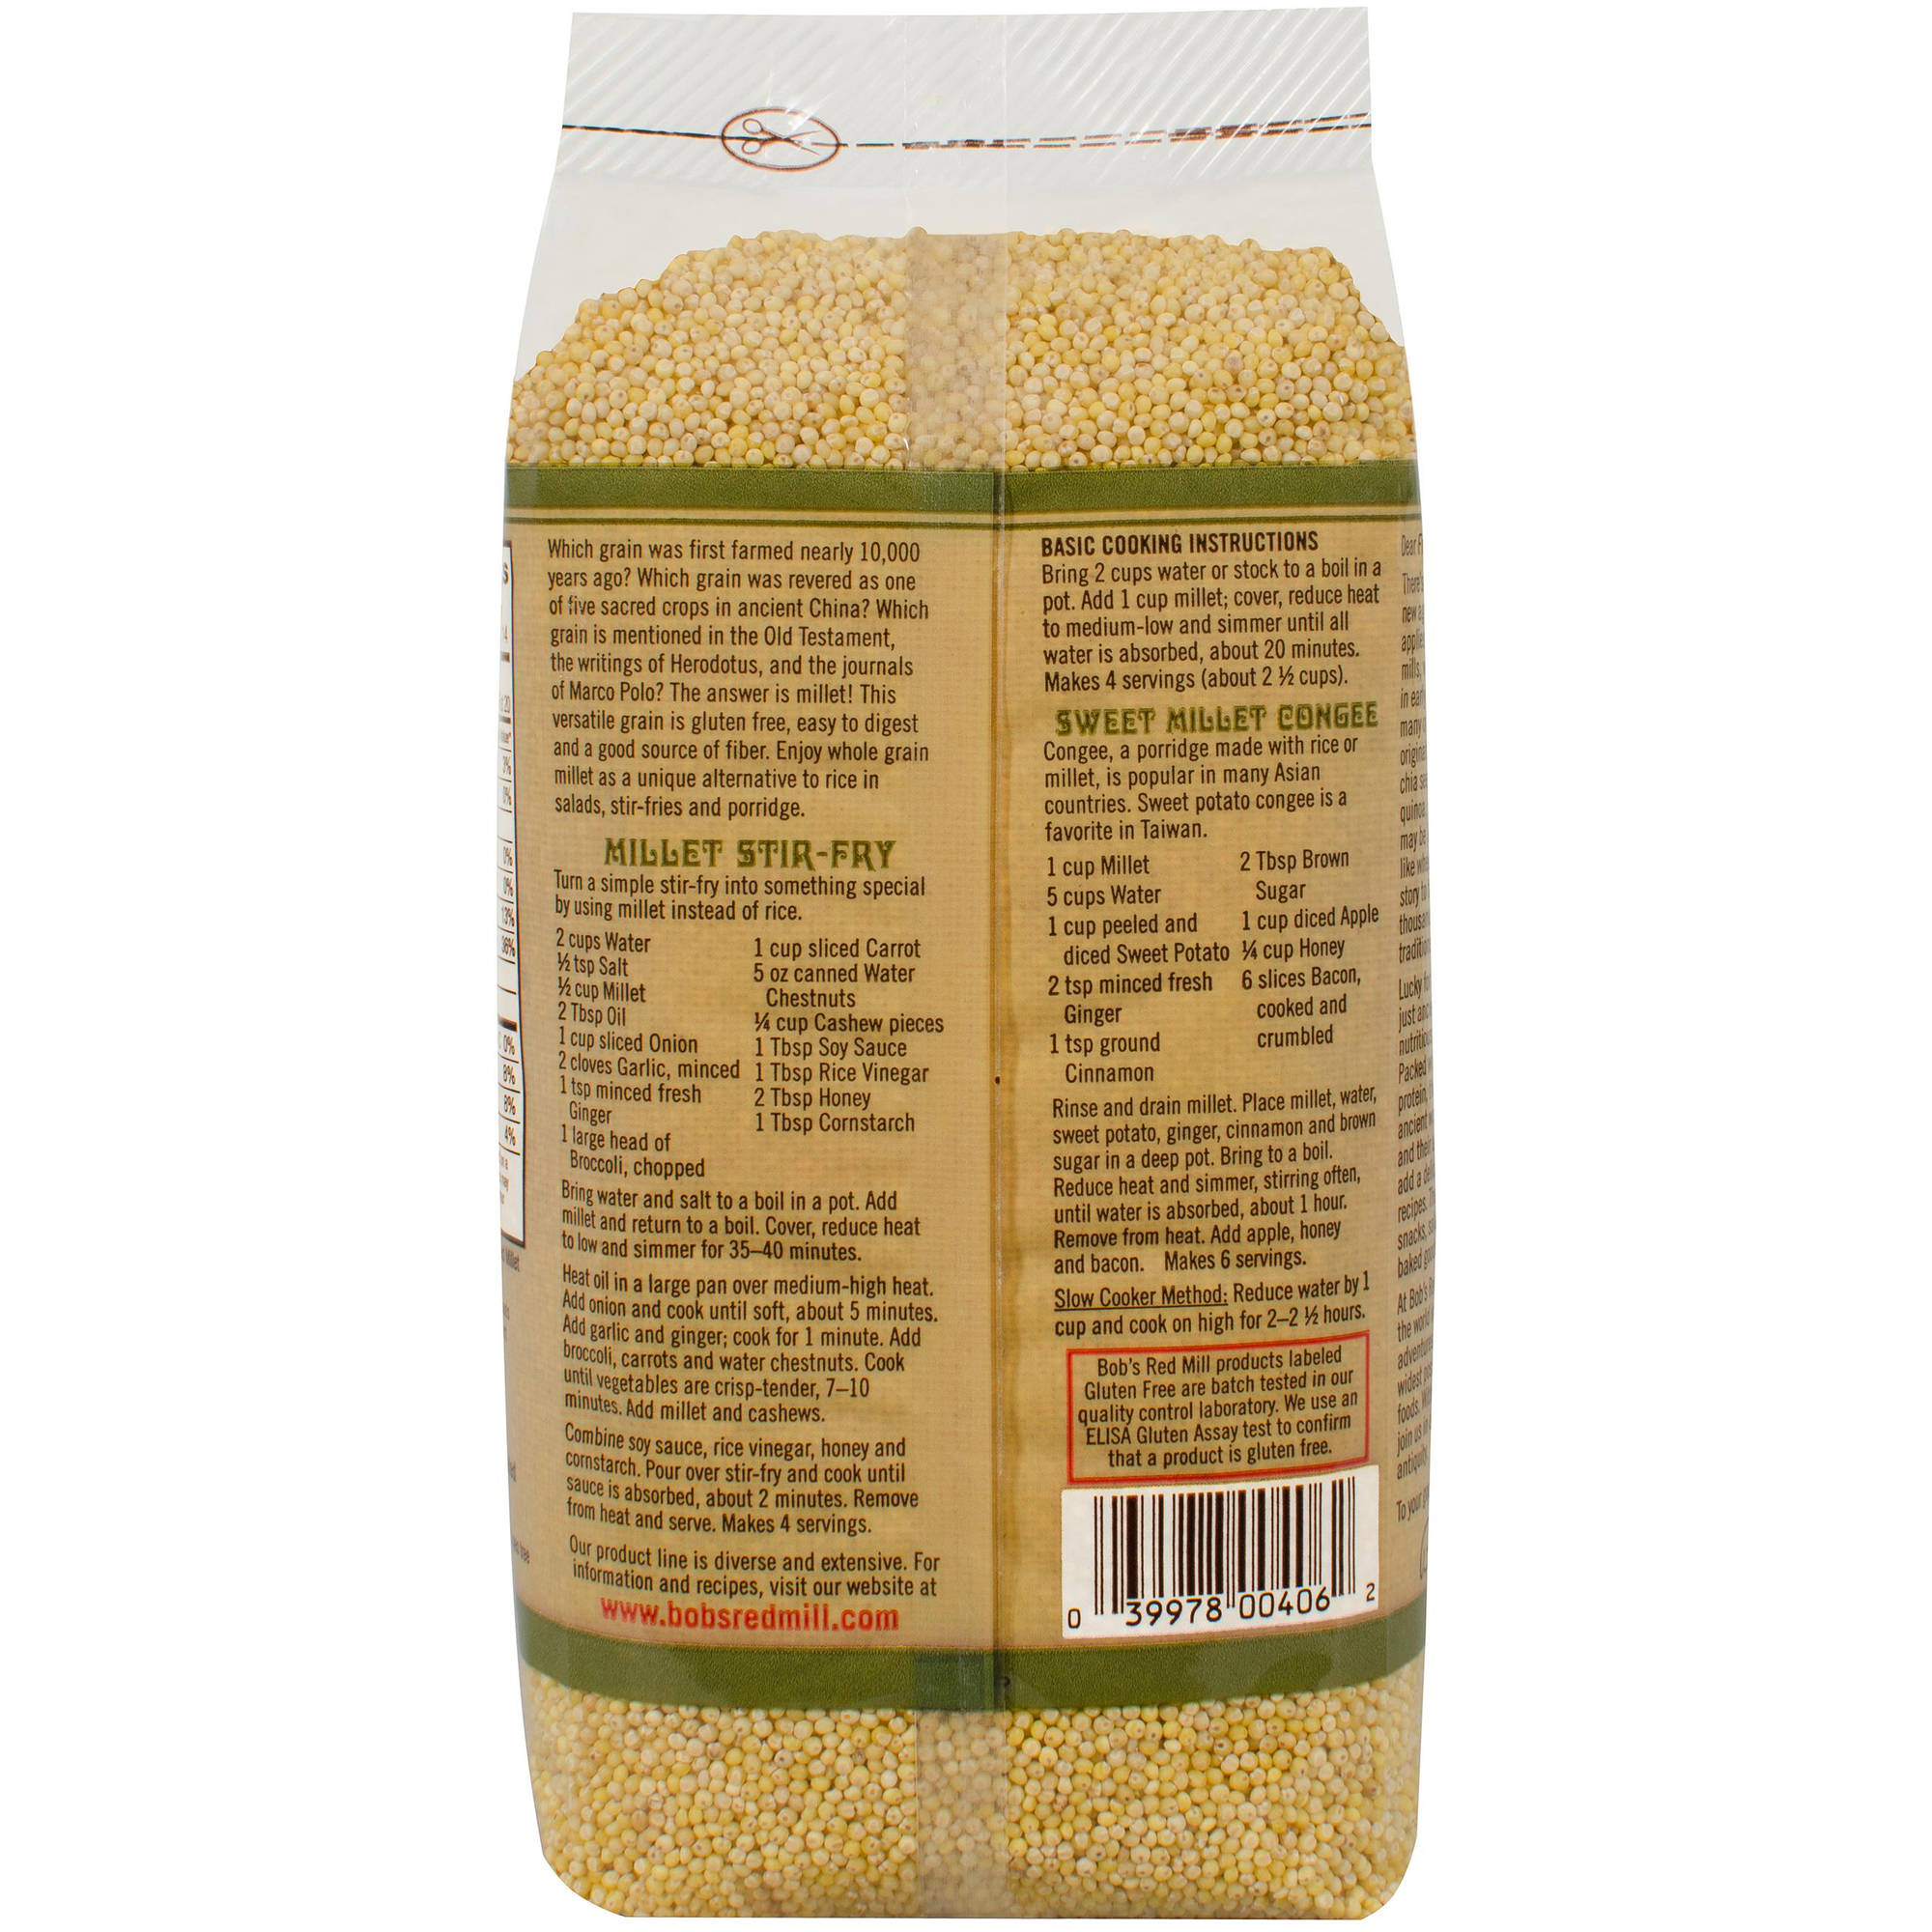 Bob's Red Mill Whole Grain Hulled Millet, 28 oz (Pack of 4) - image 2 of 3